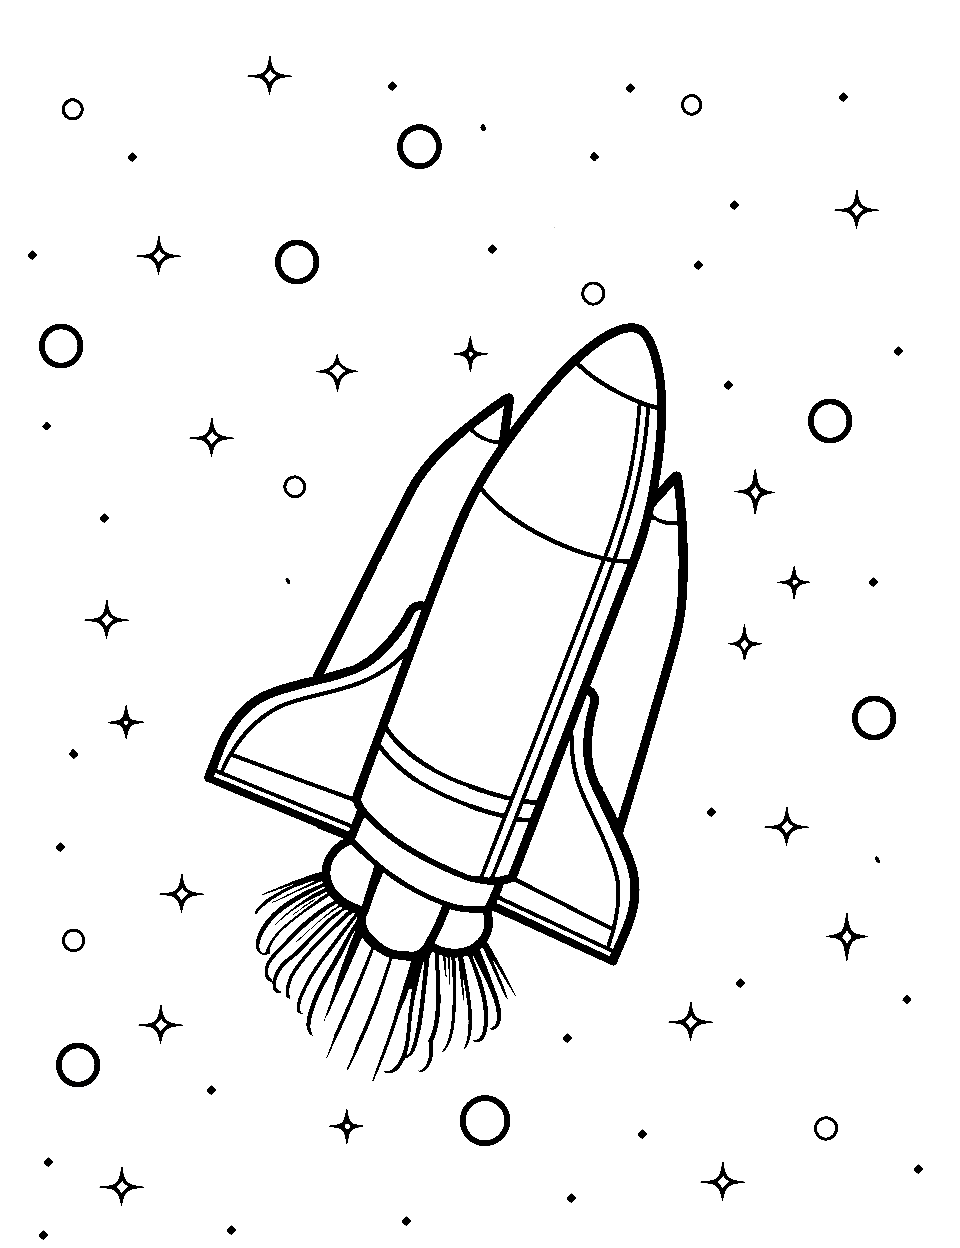 Spaceshuttle's Starry Voyage Coloring Page - A space shuttle traveling through a starry stretch of space.